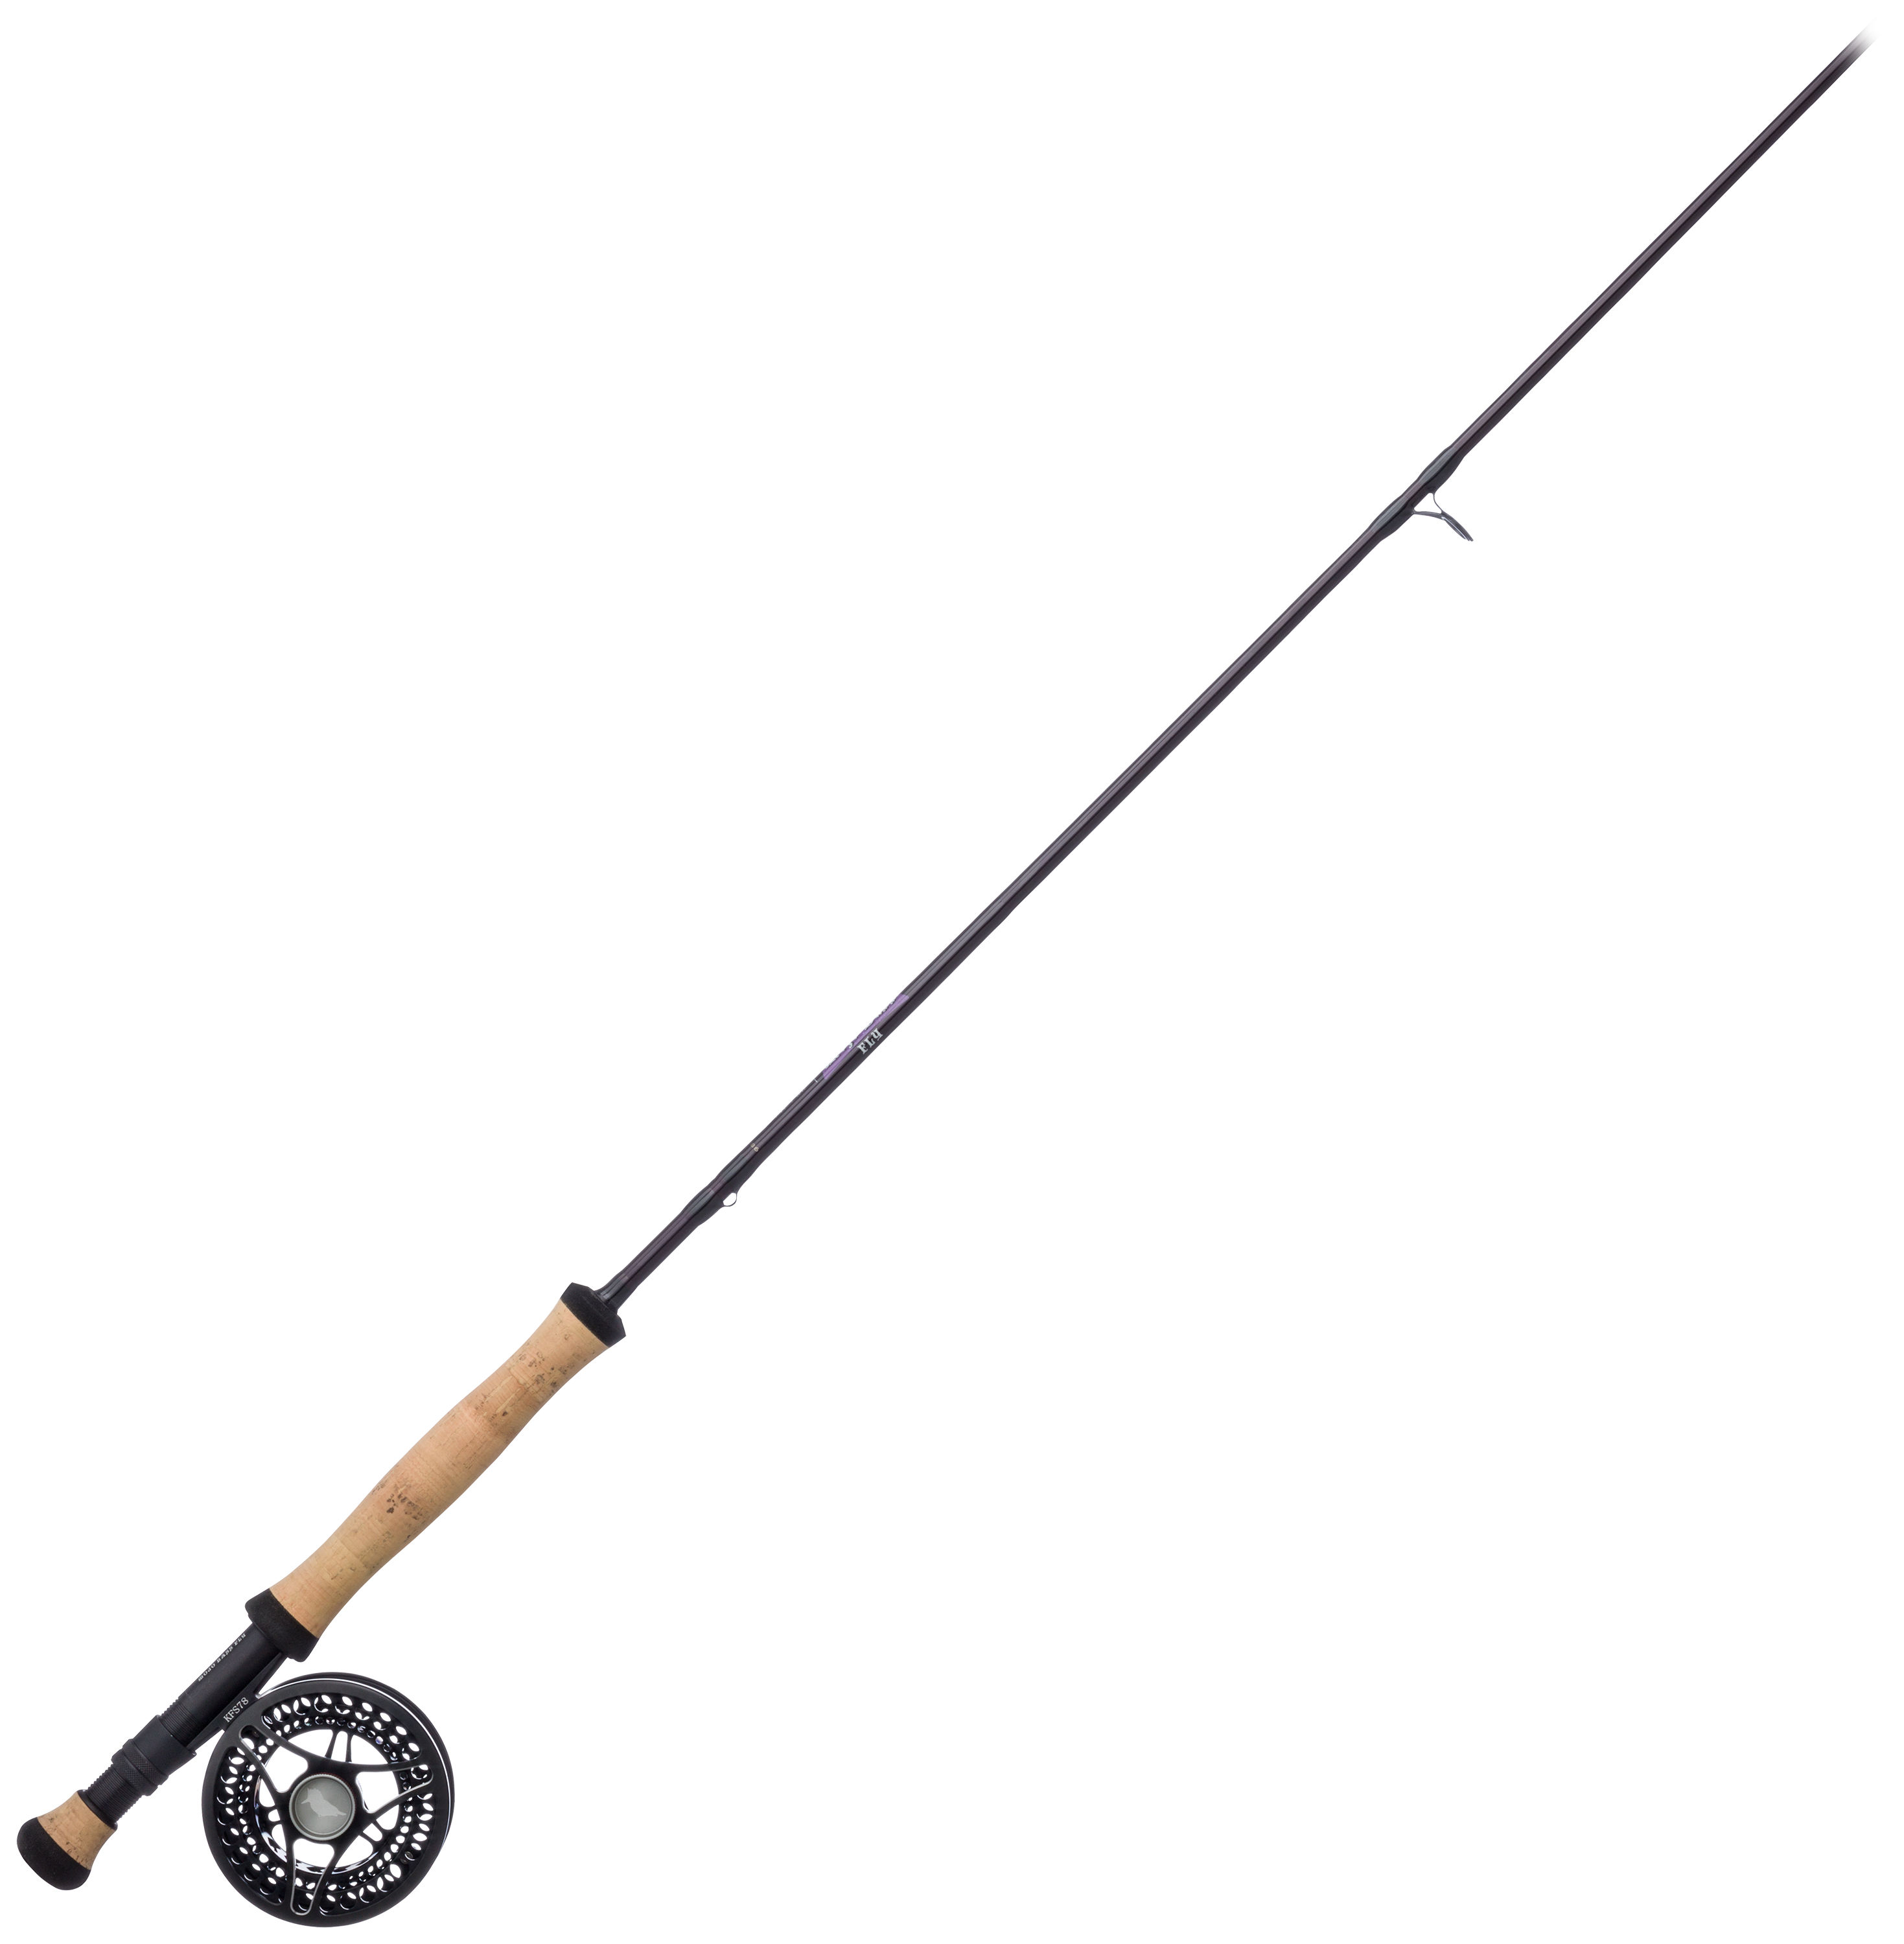 River Fly Shop Kingfisher Reel/St. Croix Mojo Bass Fly Rod Outfit - KFT78/MBF7118.2